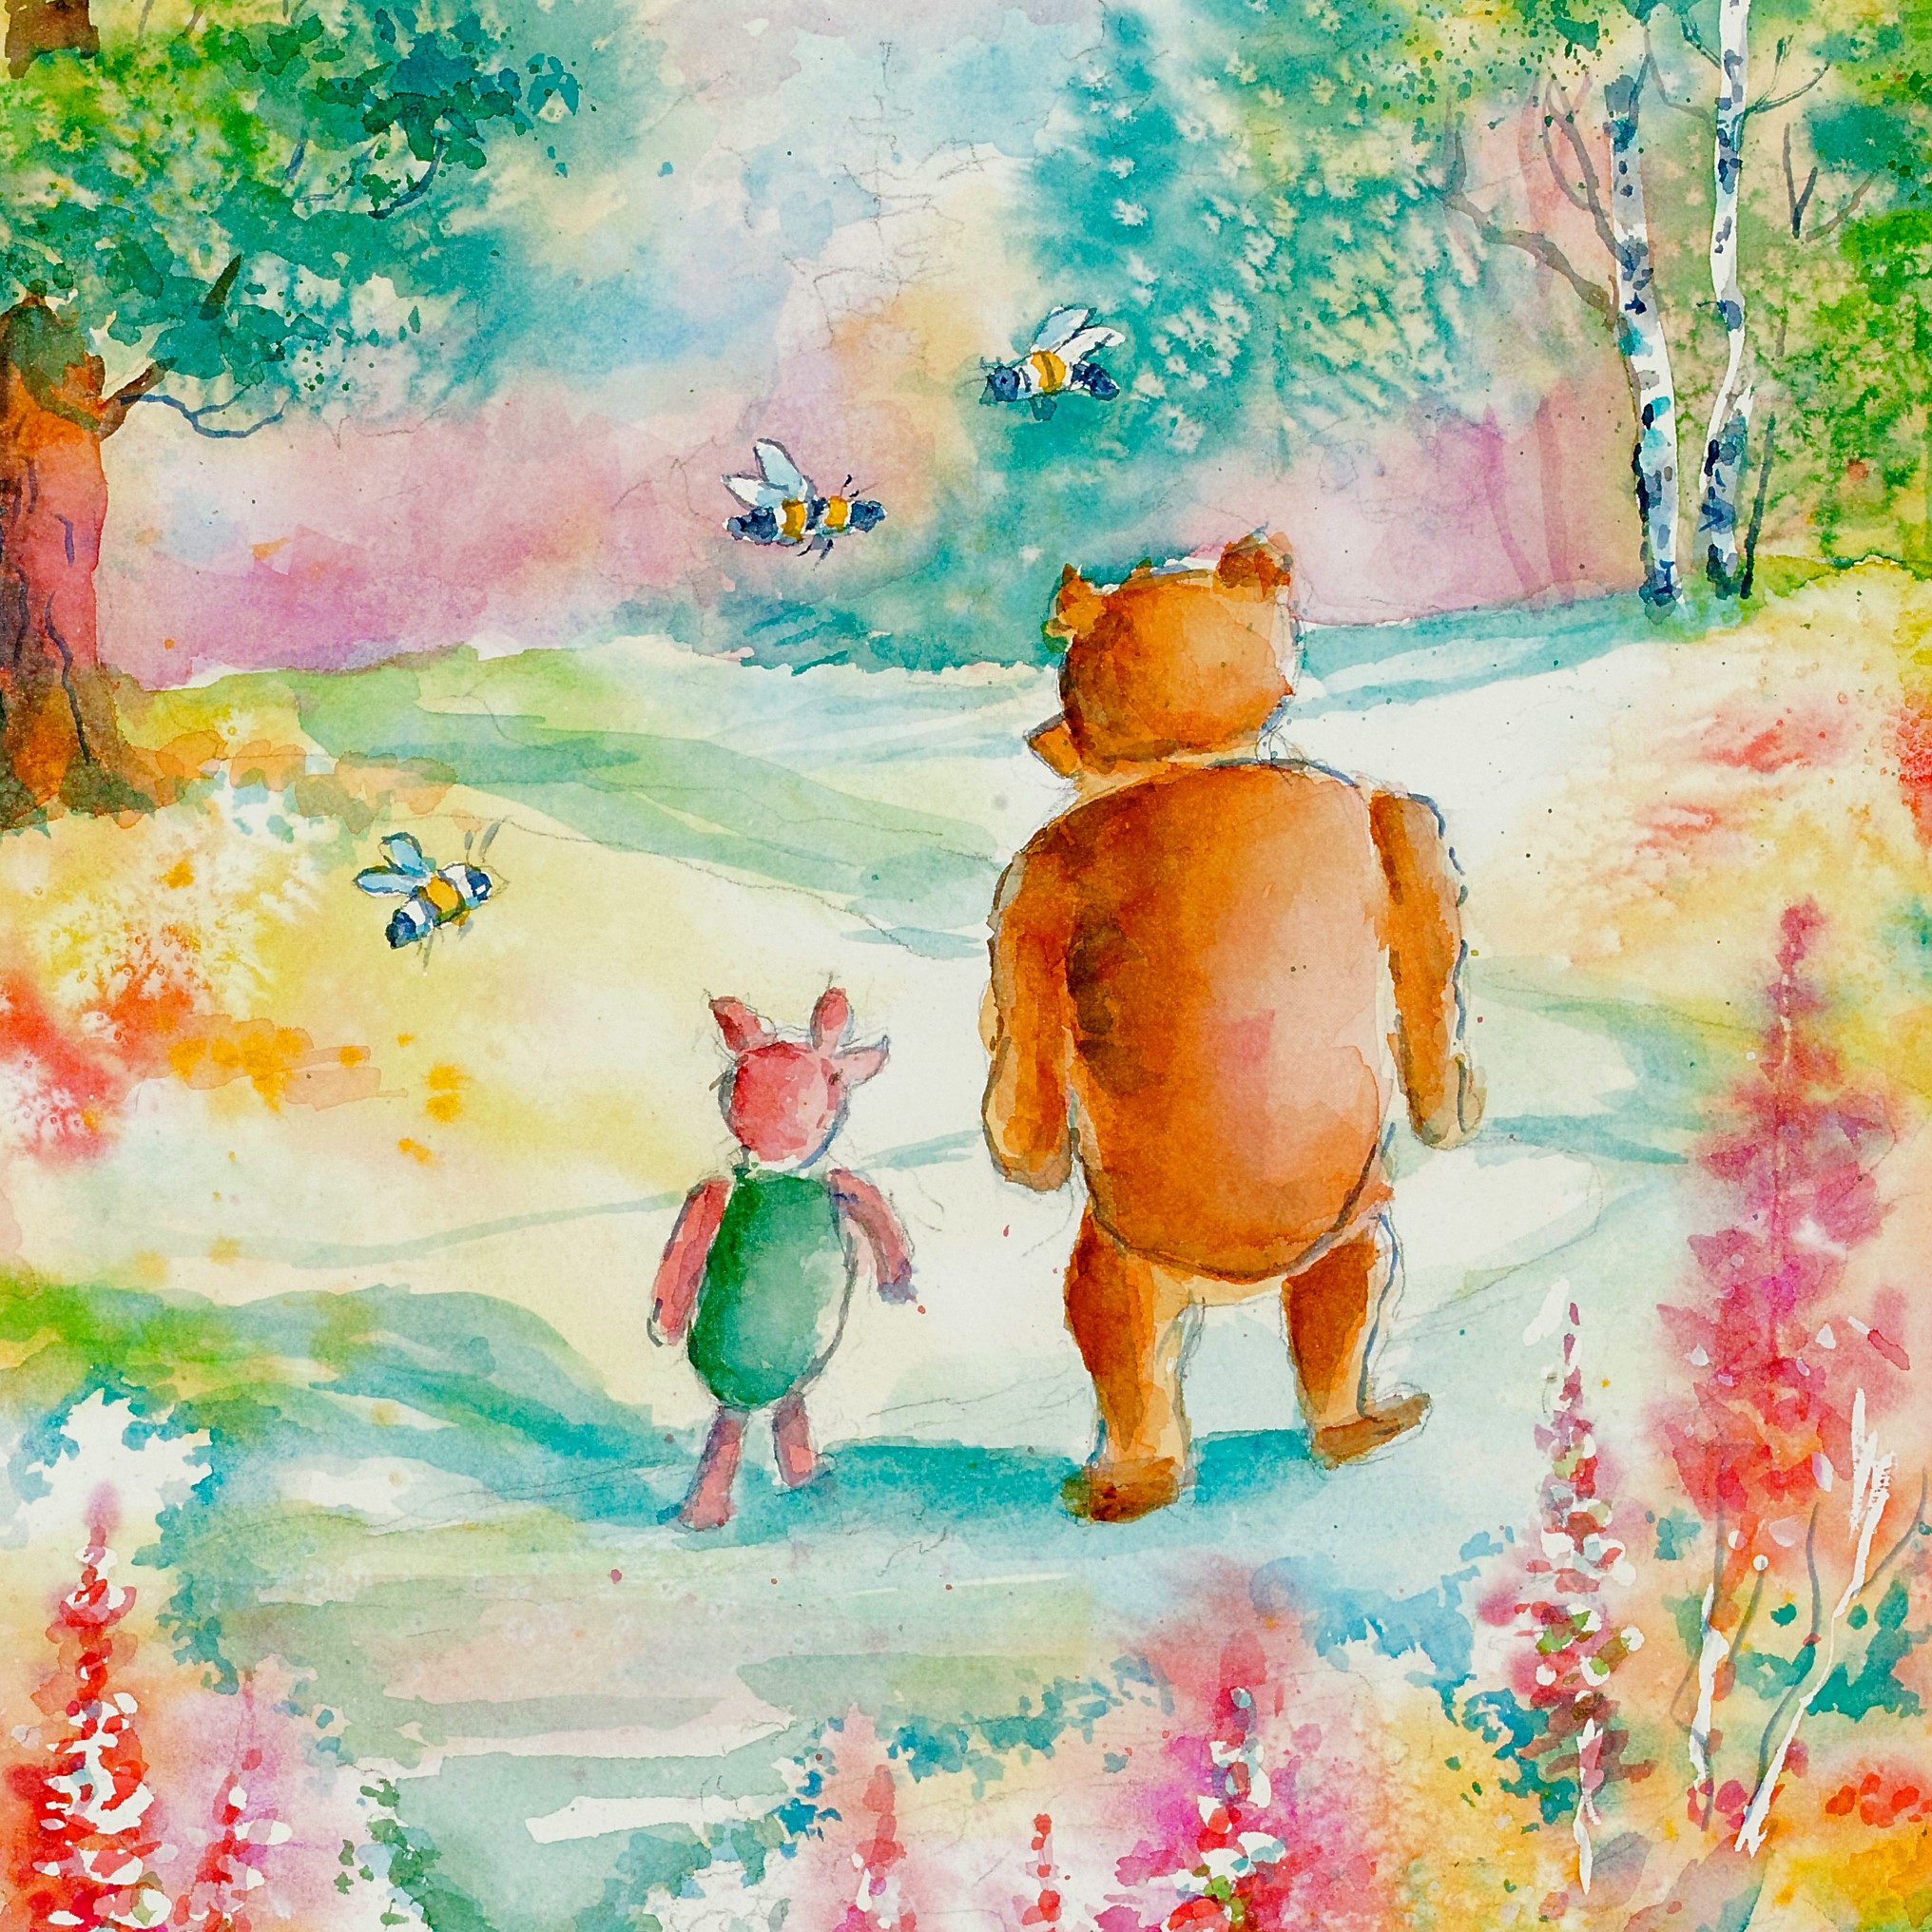 Painting of Winnie and the pooh